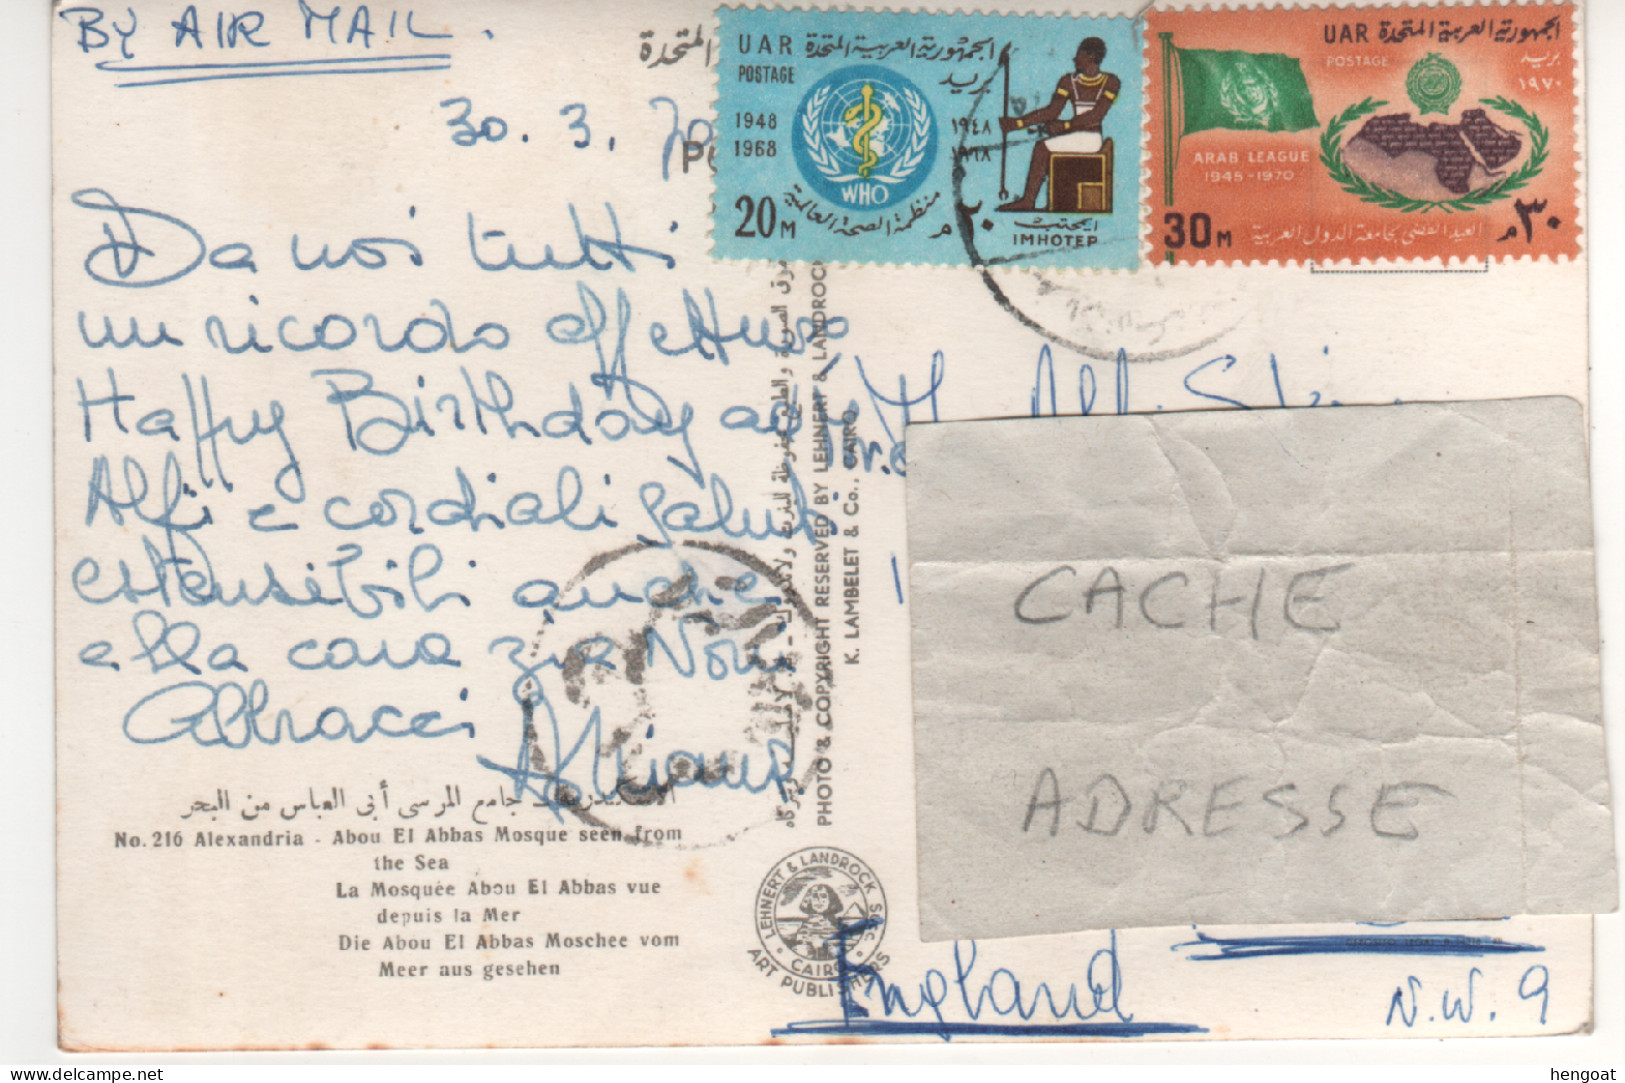 Timbres , Stamps " 1948 -1968 WHO , Imhotep ; 1945 - 1970 Ligue Arabe " Sur CP , Carte , Postcard Du 30/03/70 - Lettres & Documents